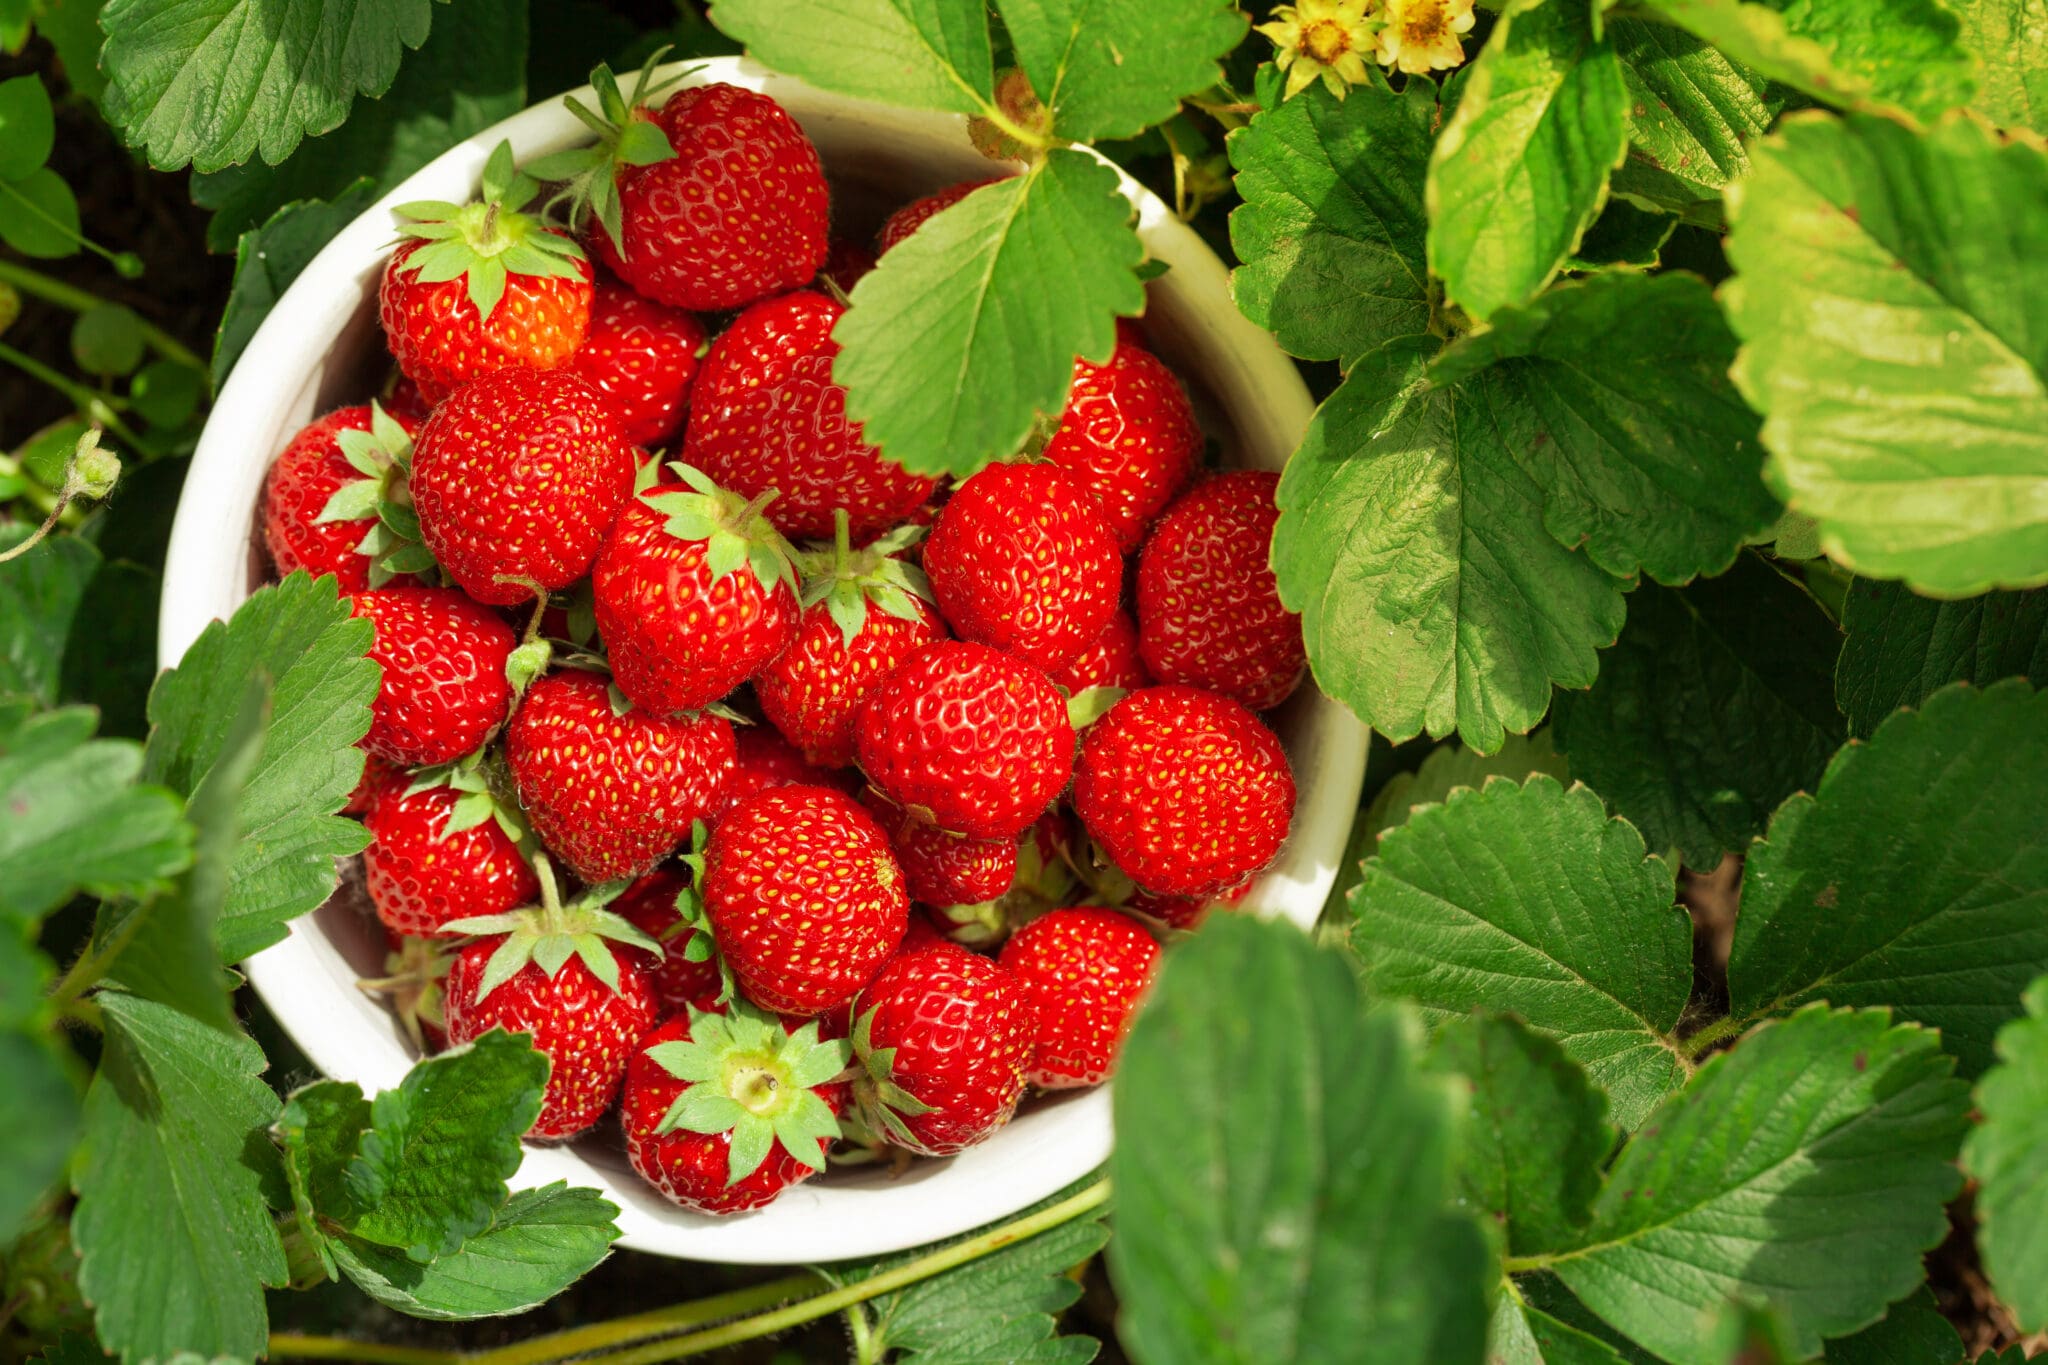 Strawberries in a white bowl surrounded by green leaves.